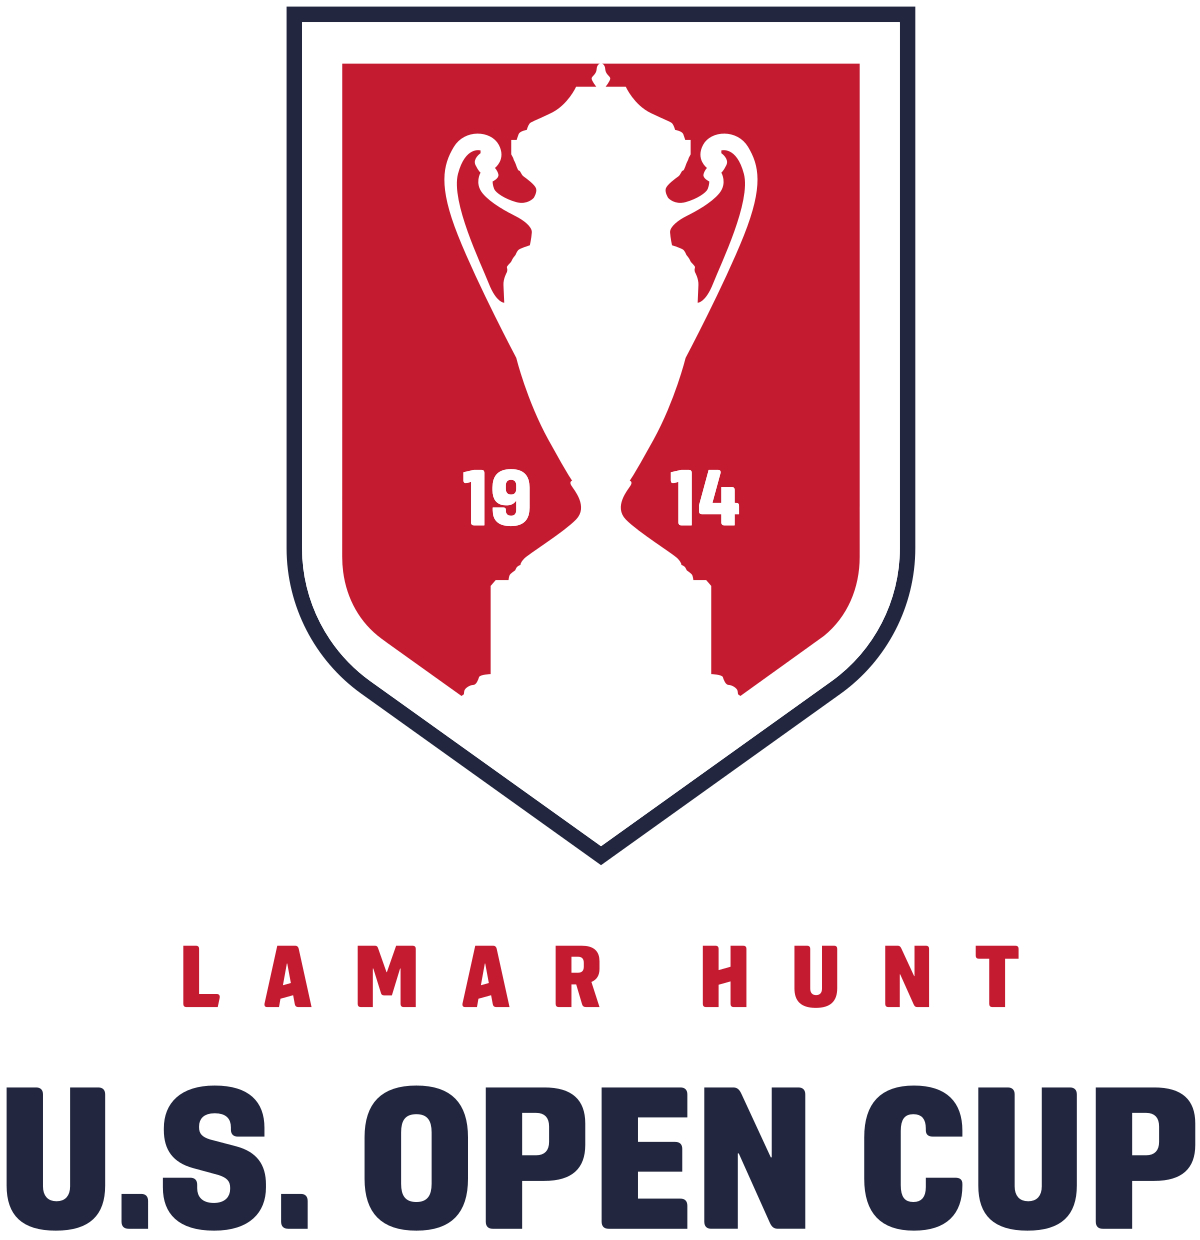 US OPEN CUP